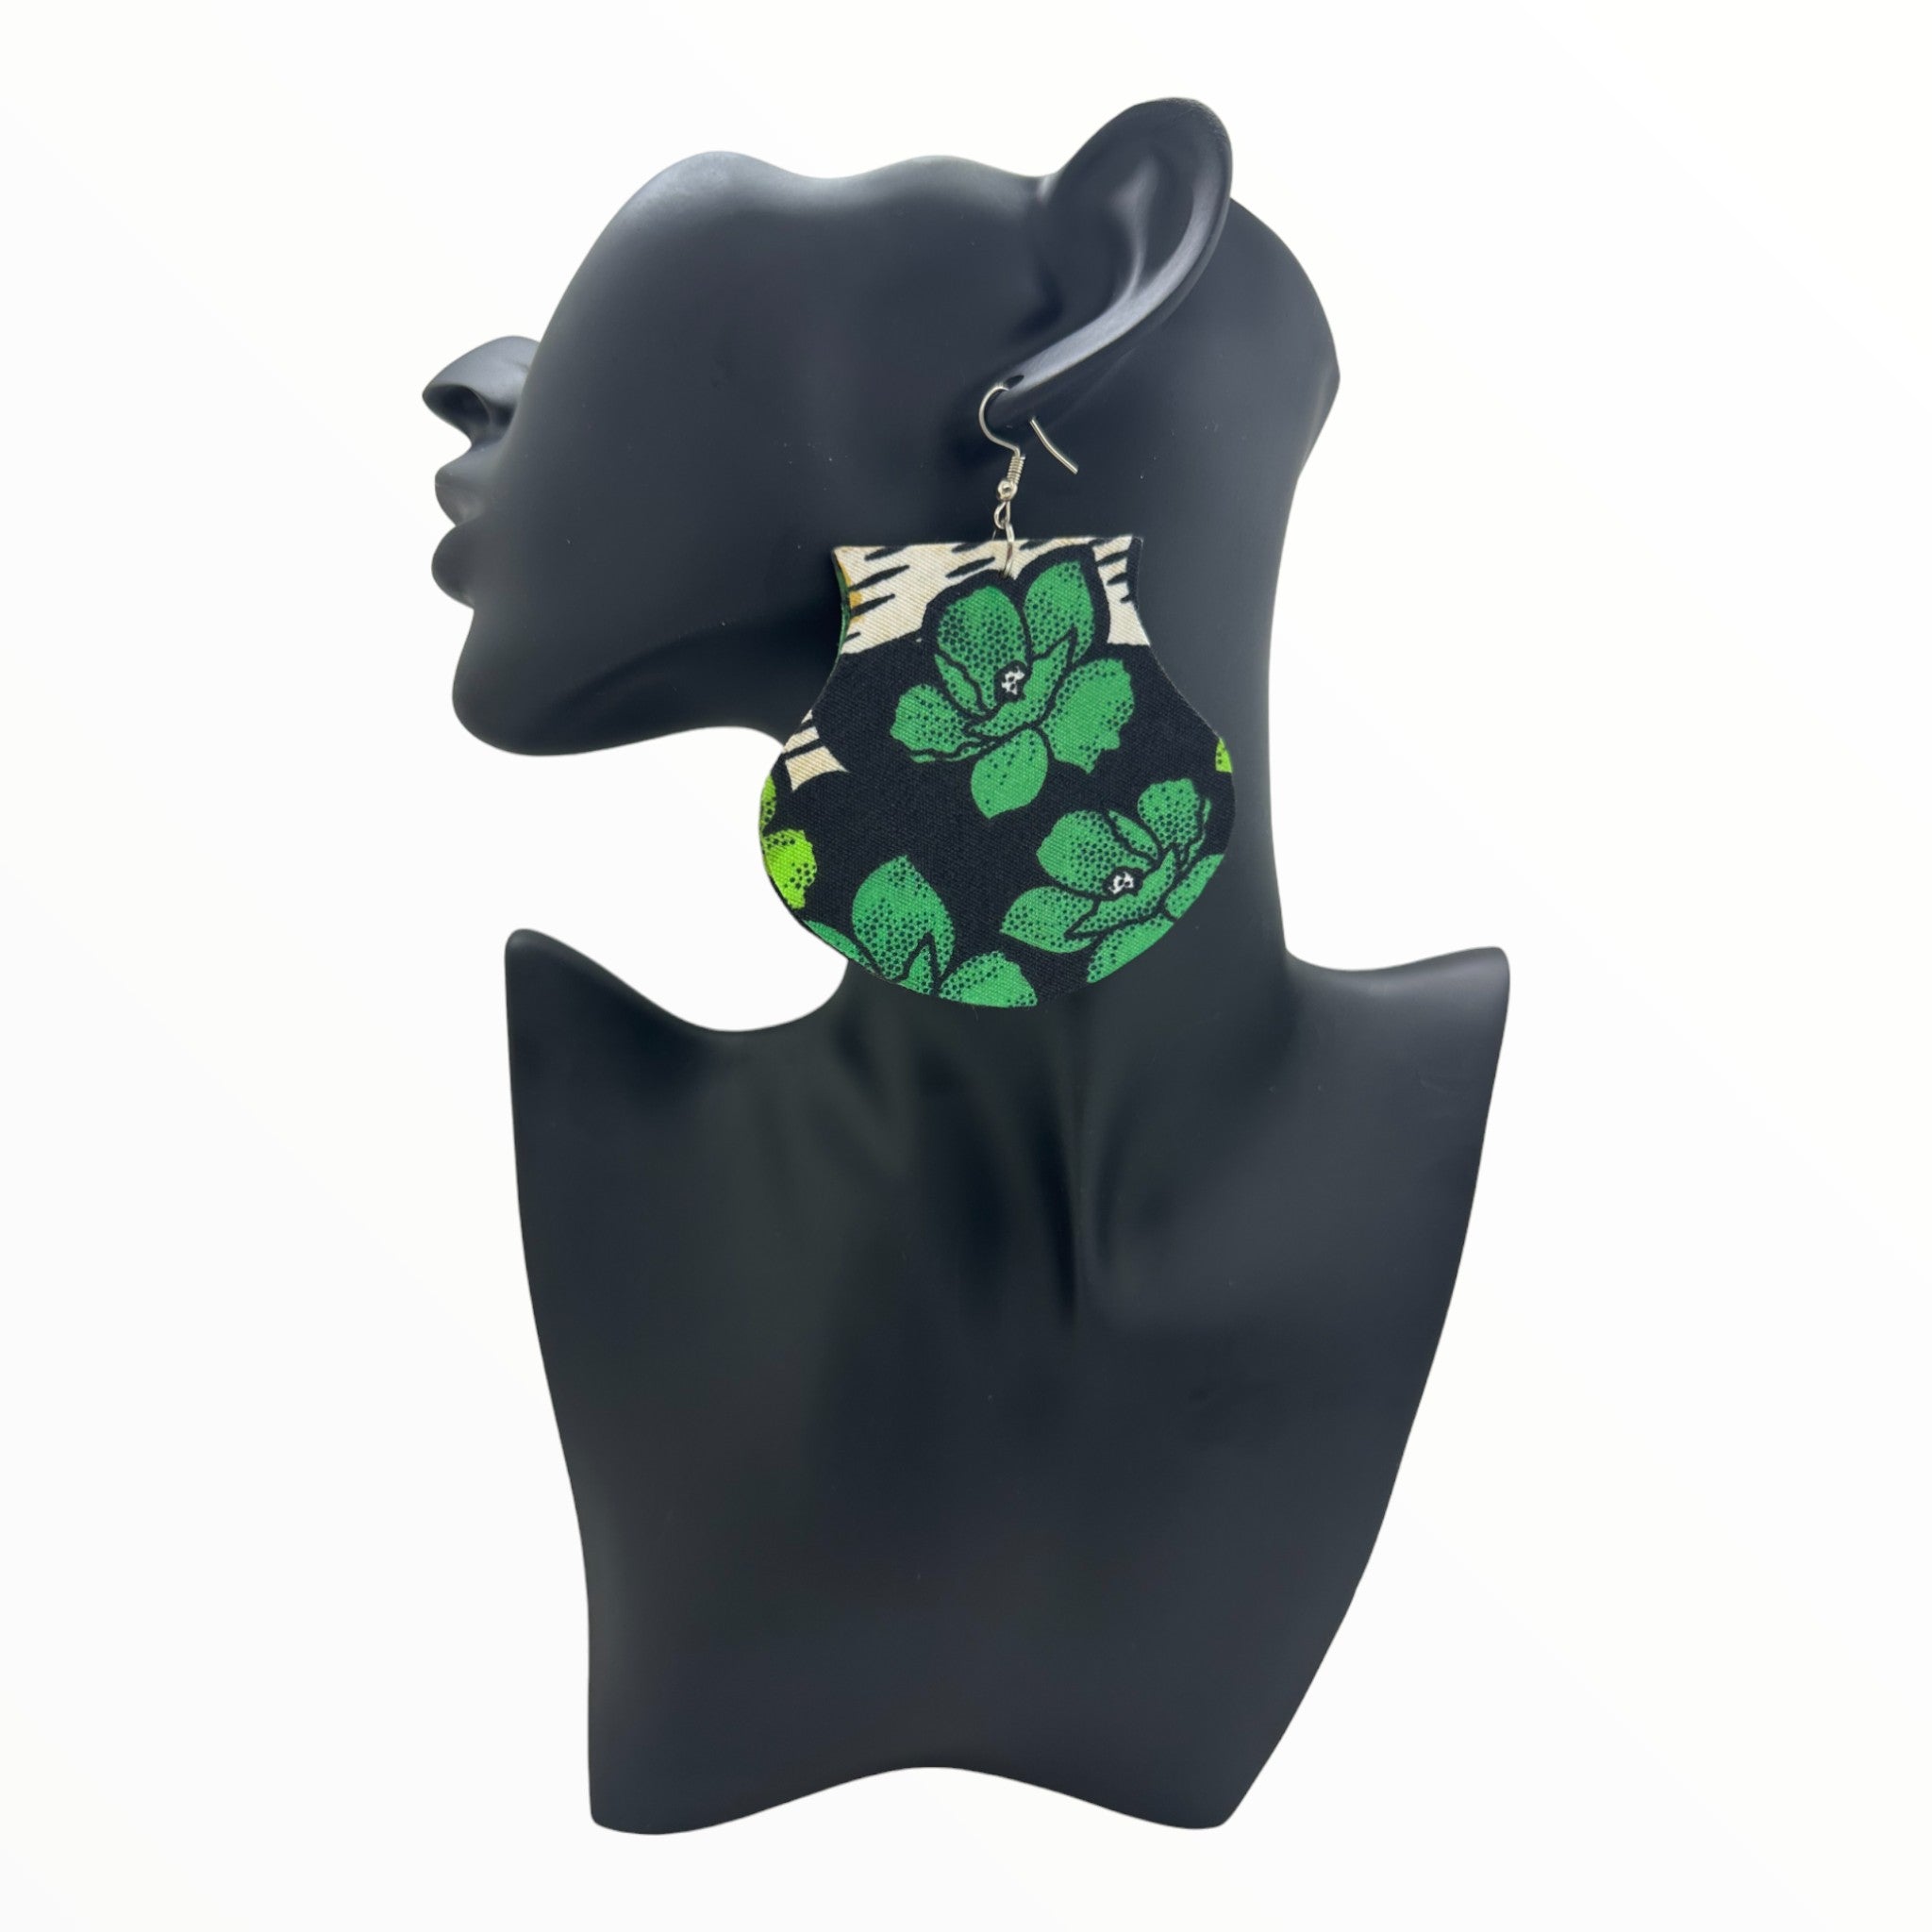 Afrocentric Ankara Fabric Earrings- Vase Shape (Light and Dark Green, Black and White)